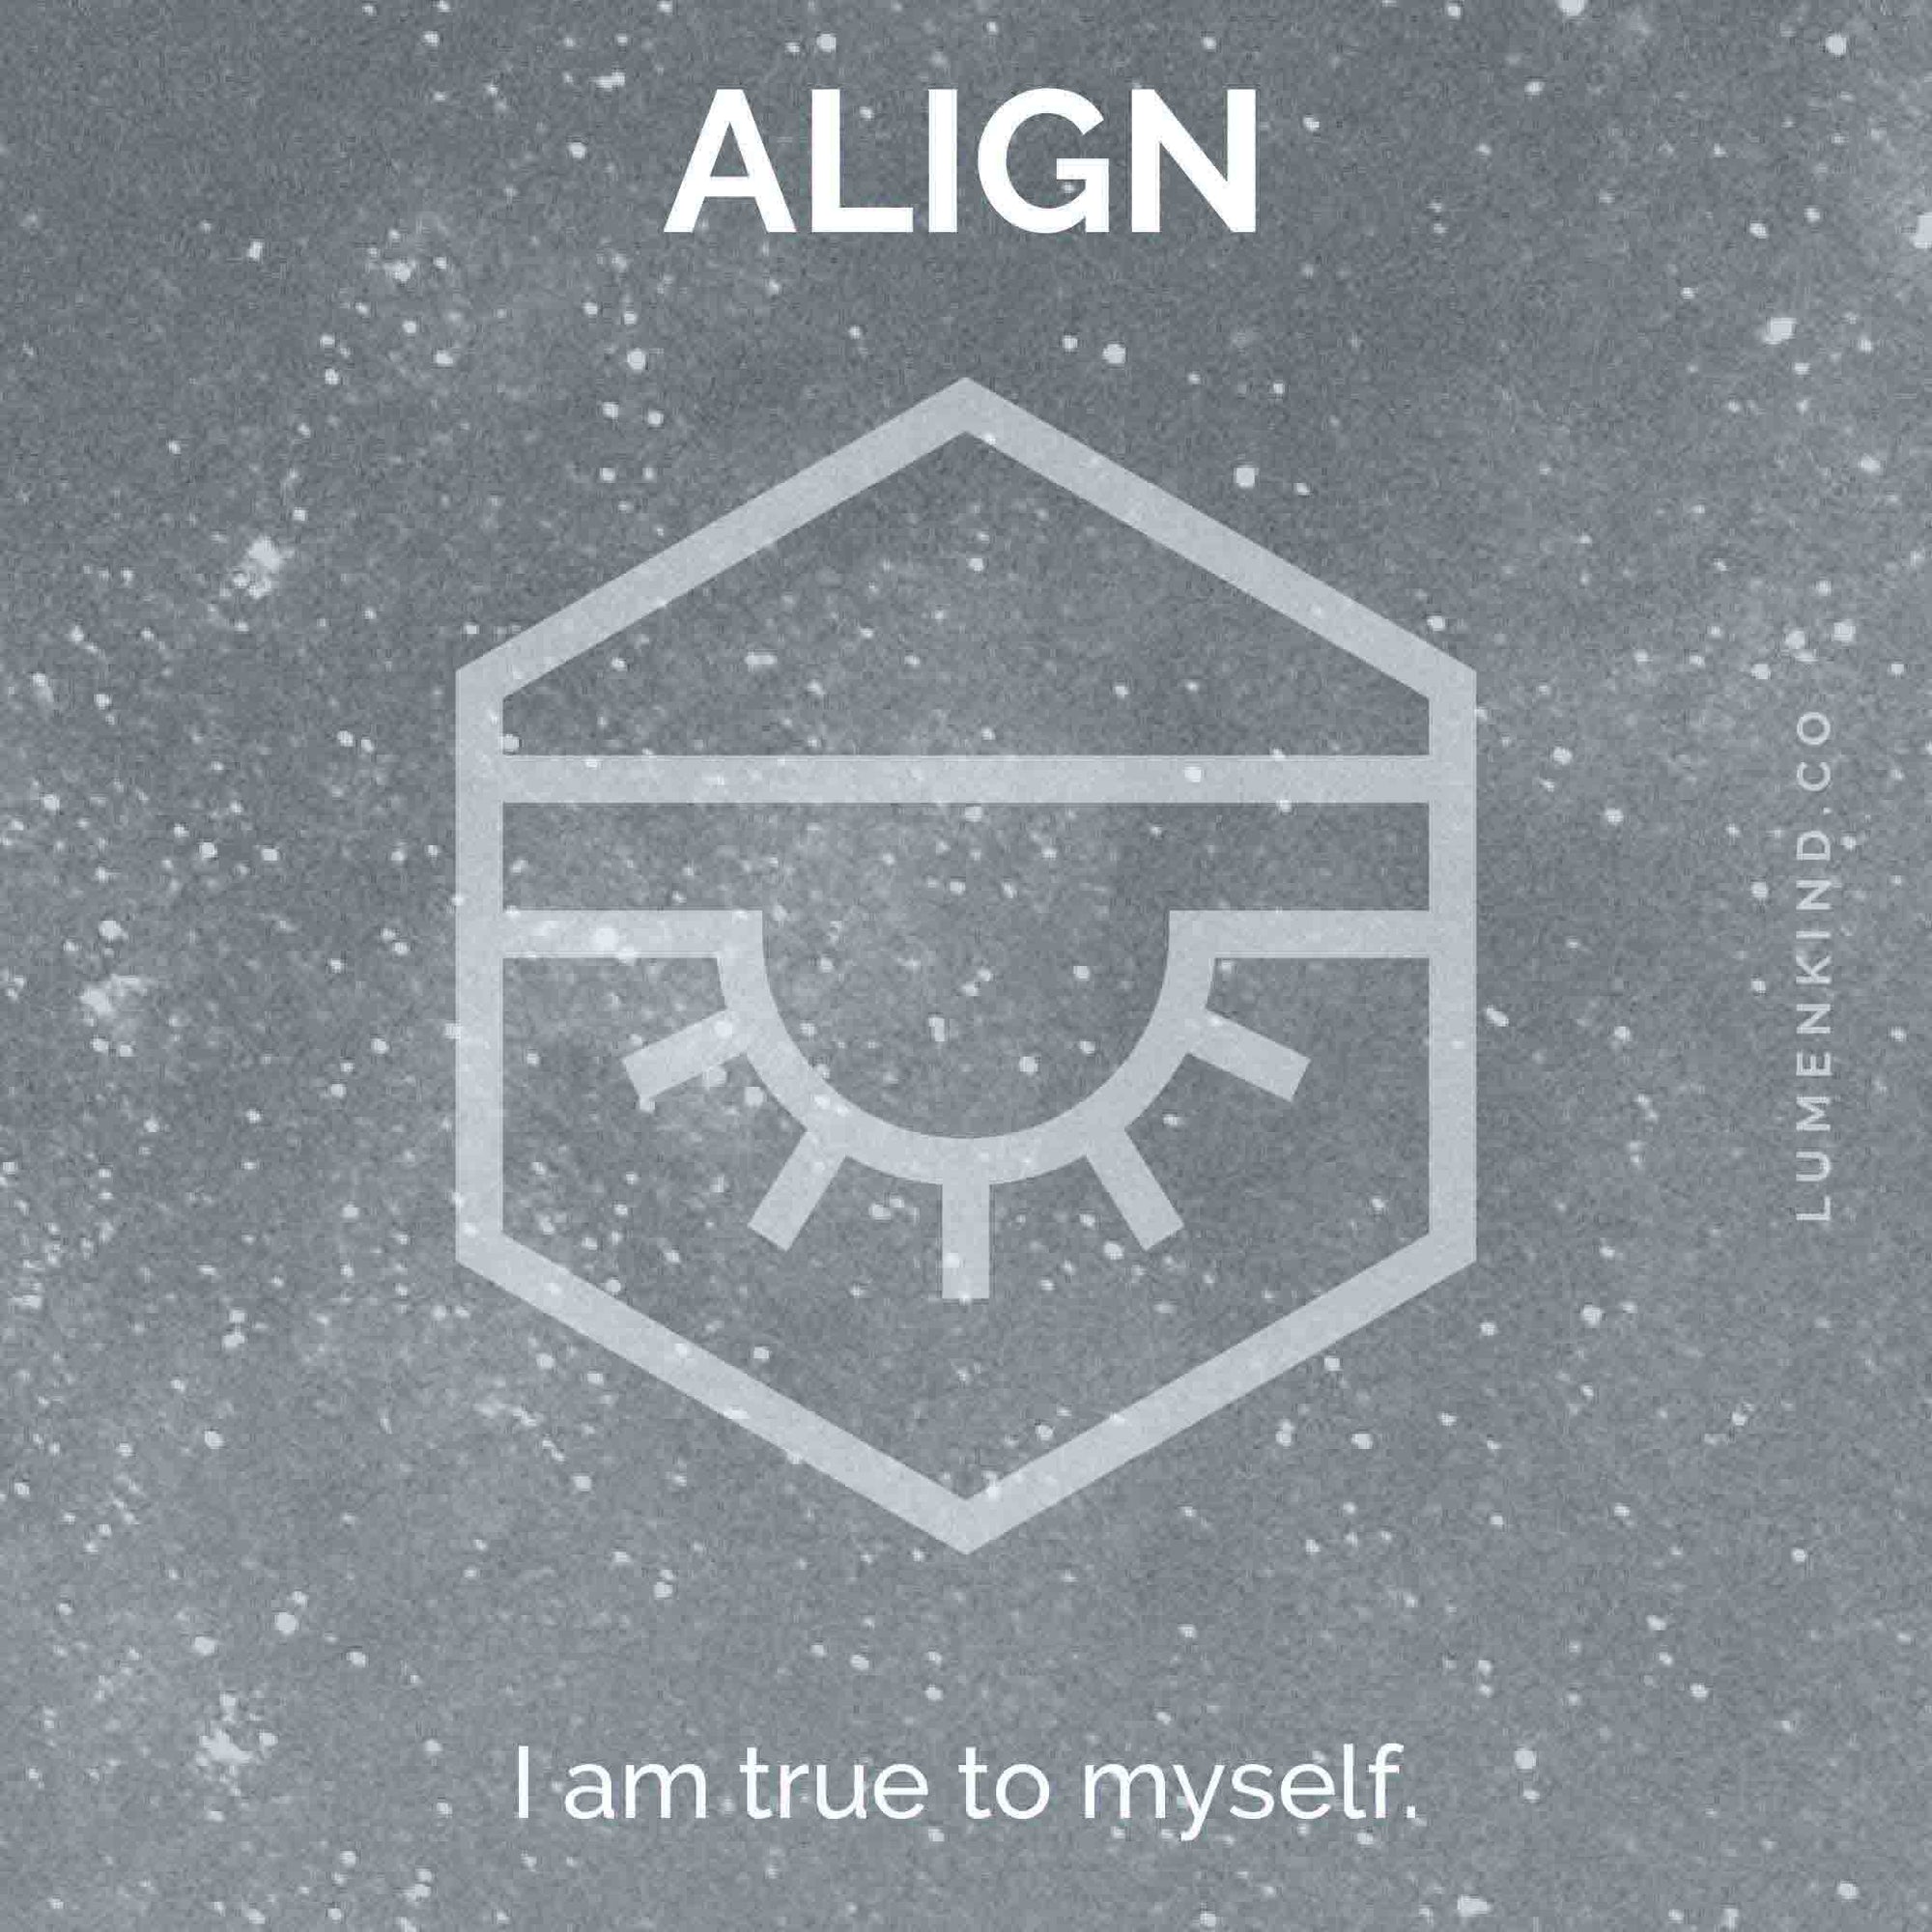 The suggested intention is ALIGN. I am true to myself.